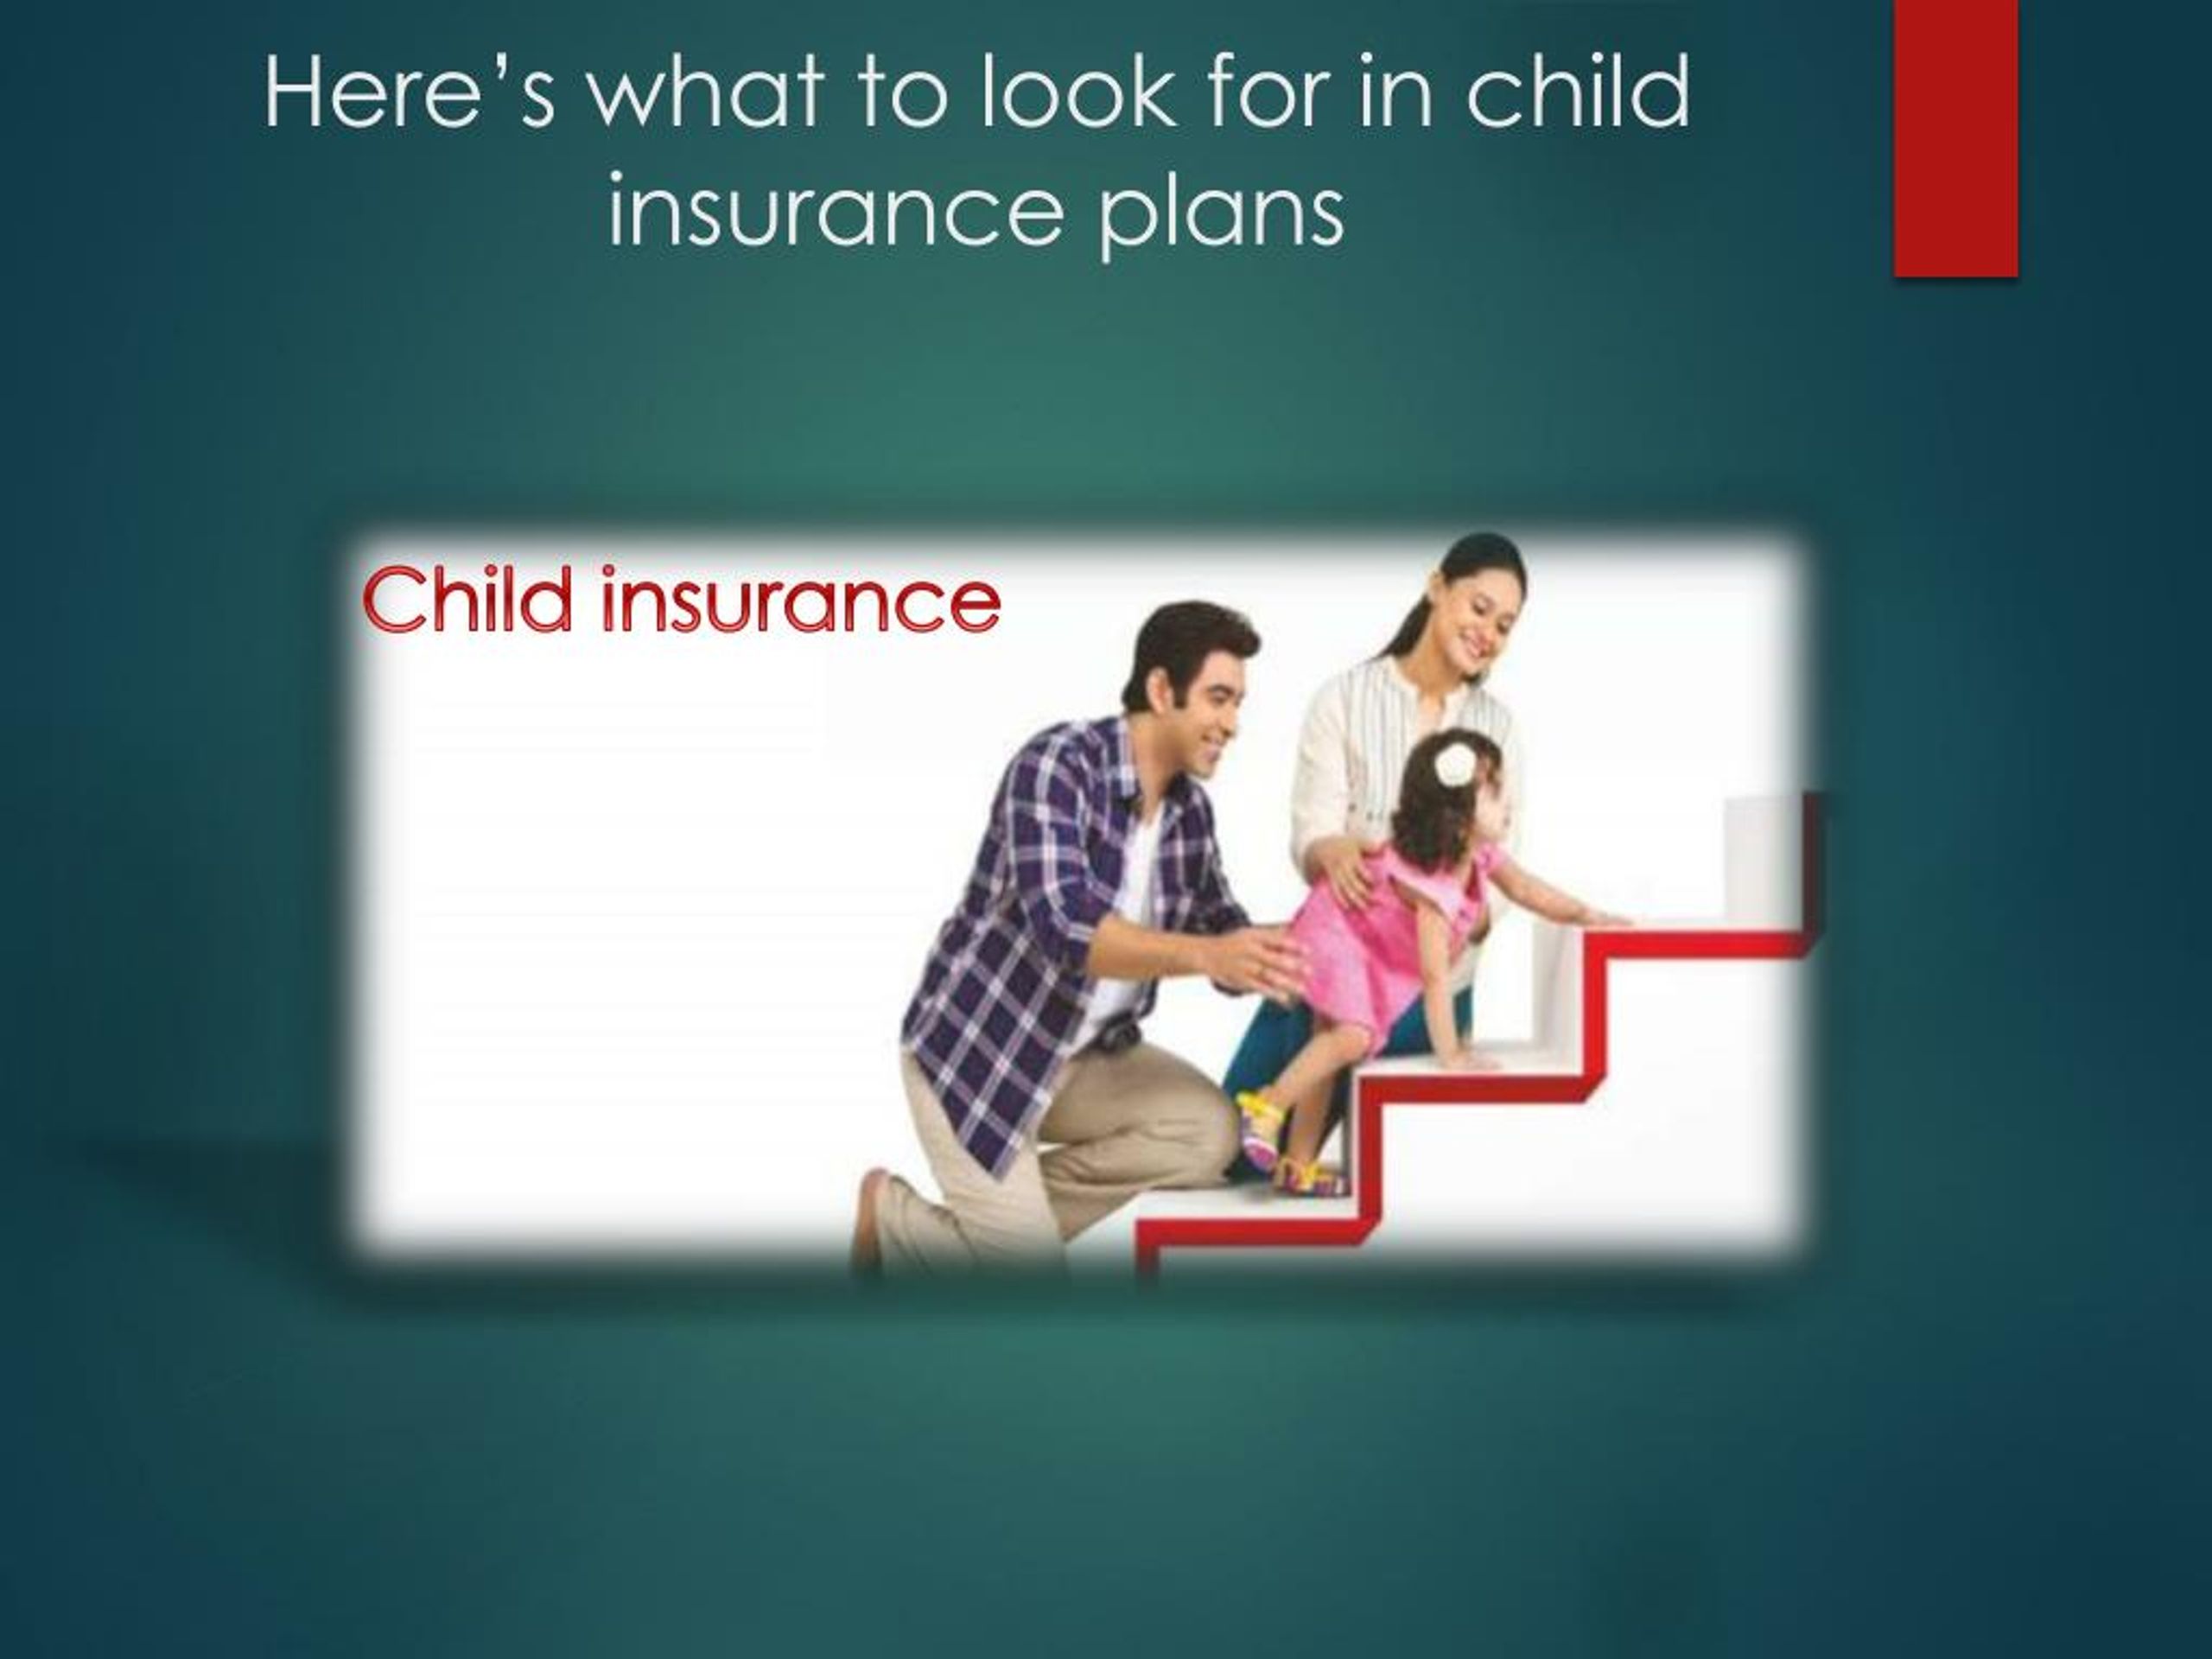 ppt - here's what to look for in child insurance plans